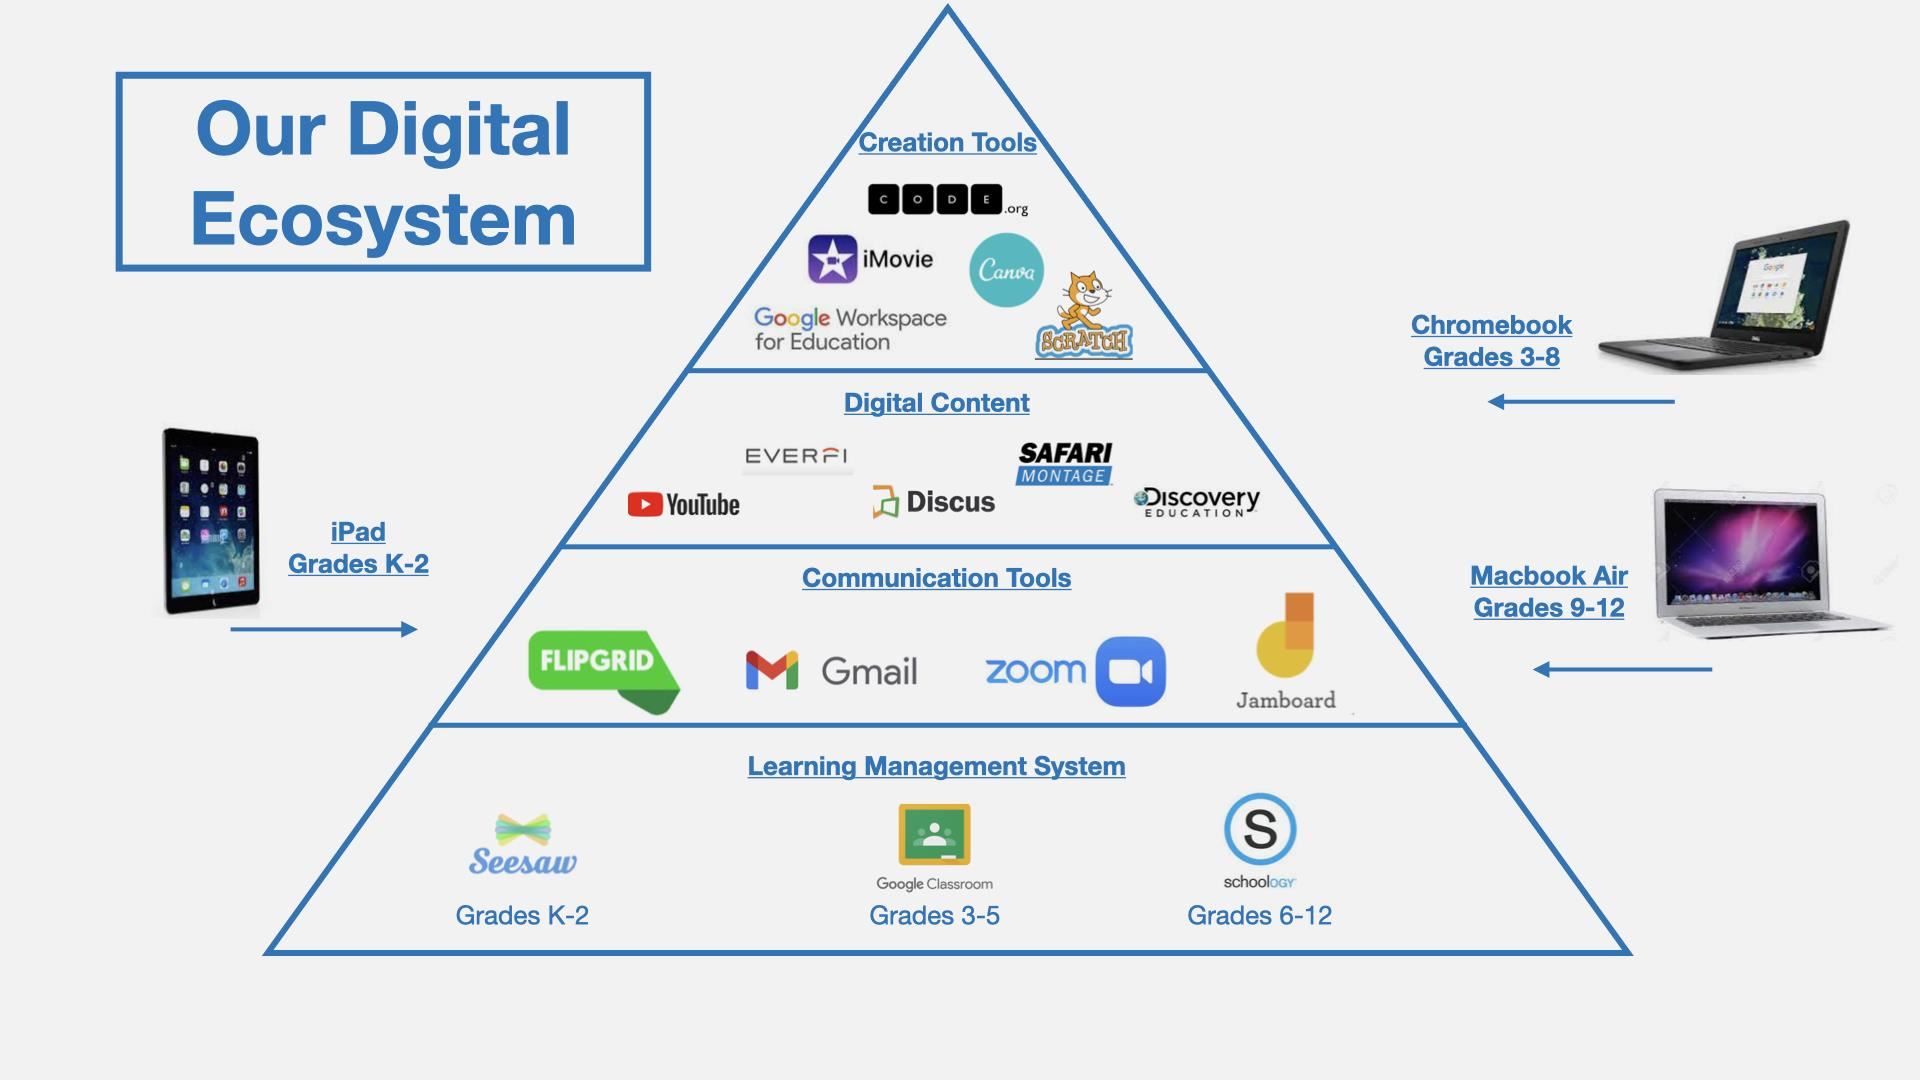 Our Digital Ecosystem chart